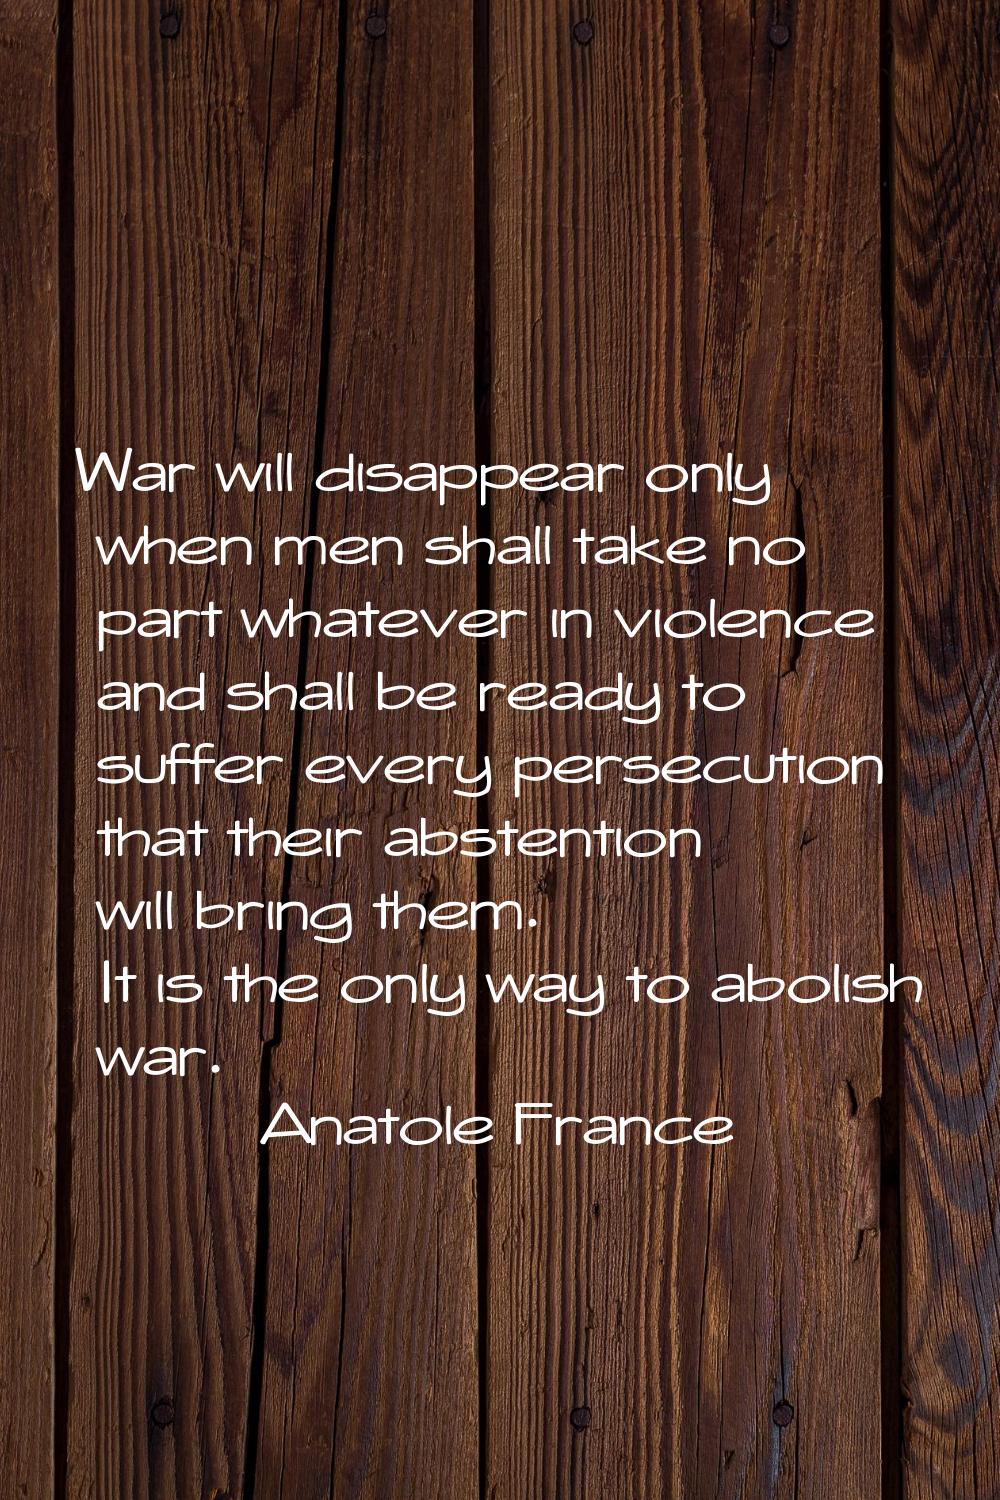 War will disappear only when men shall take no part whatever in violence and shall be ready to suff